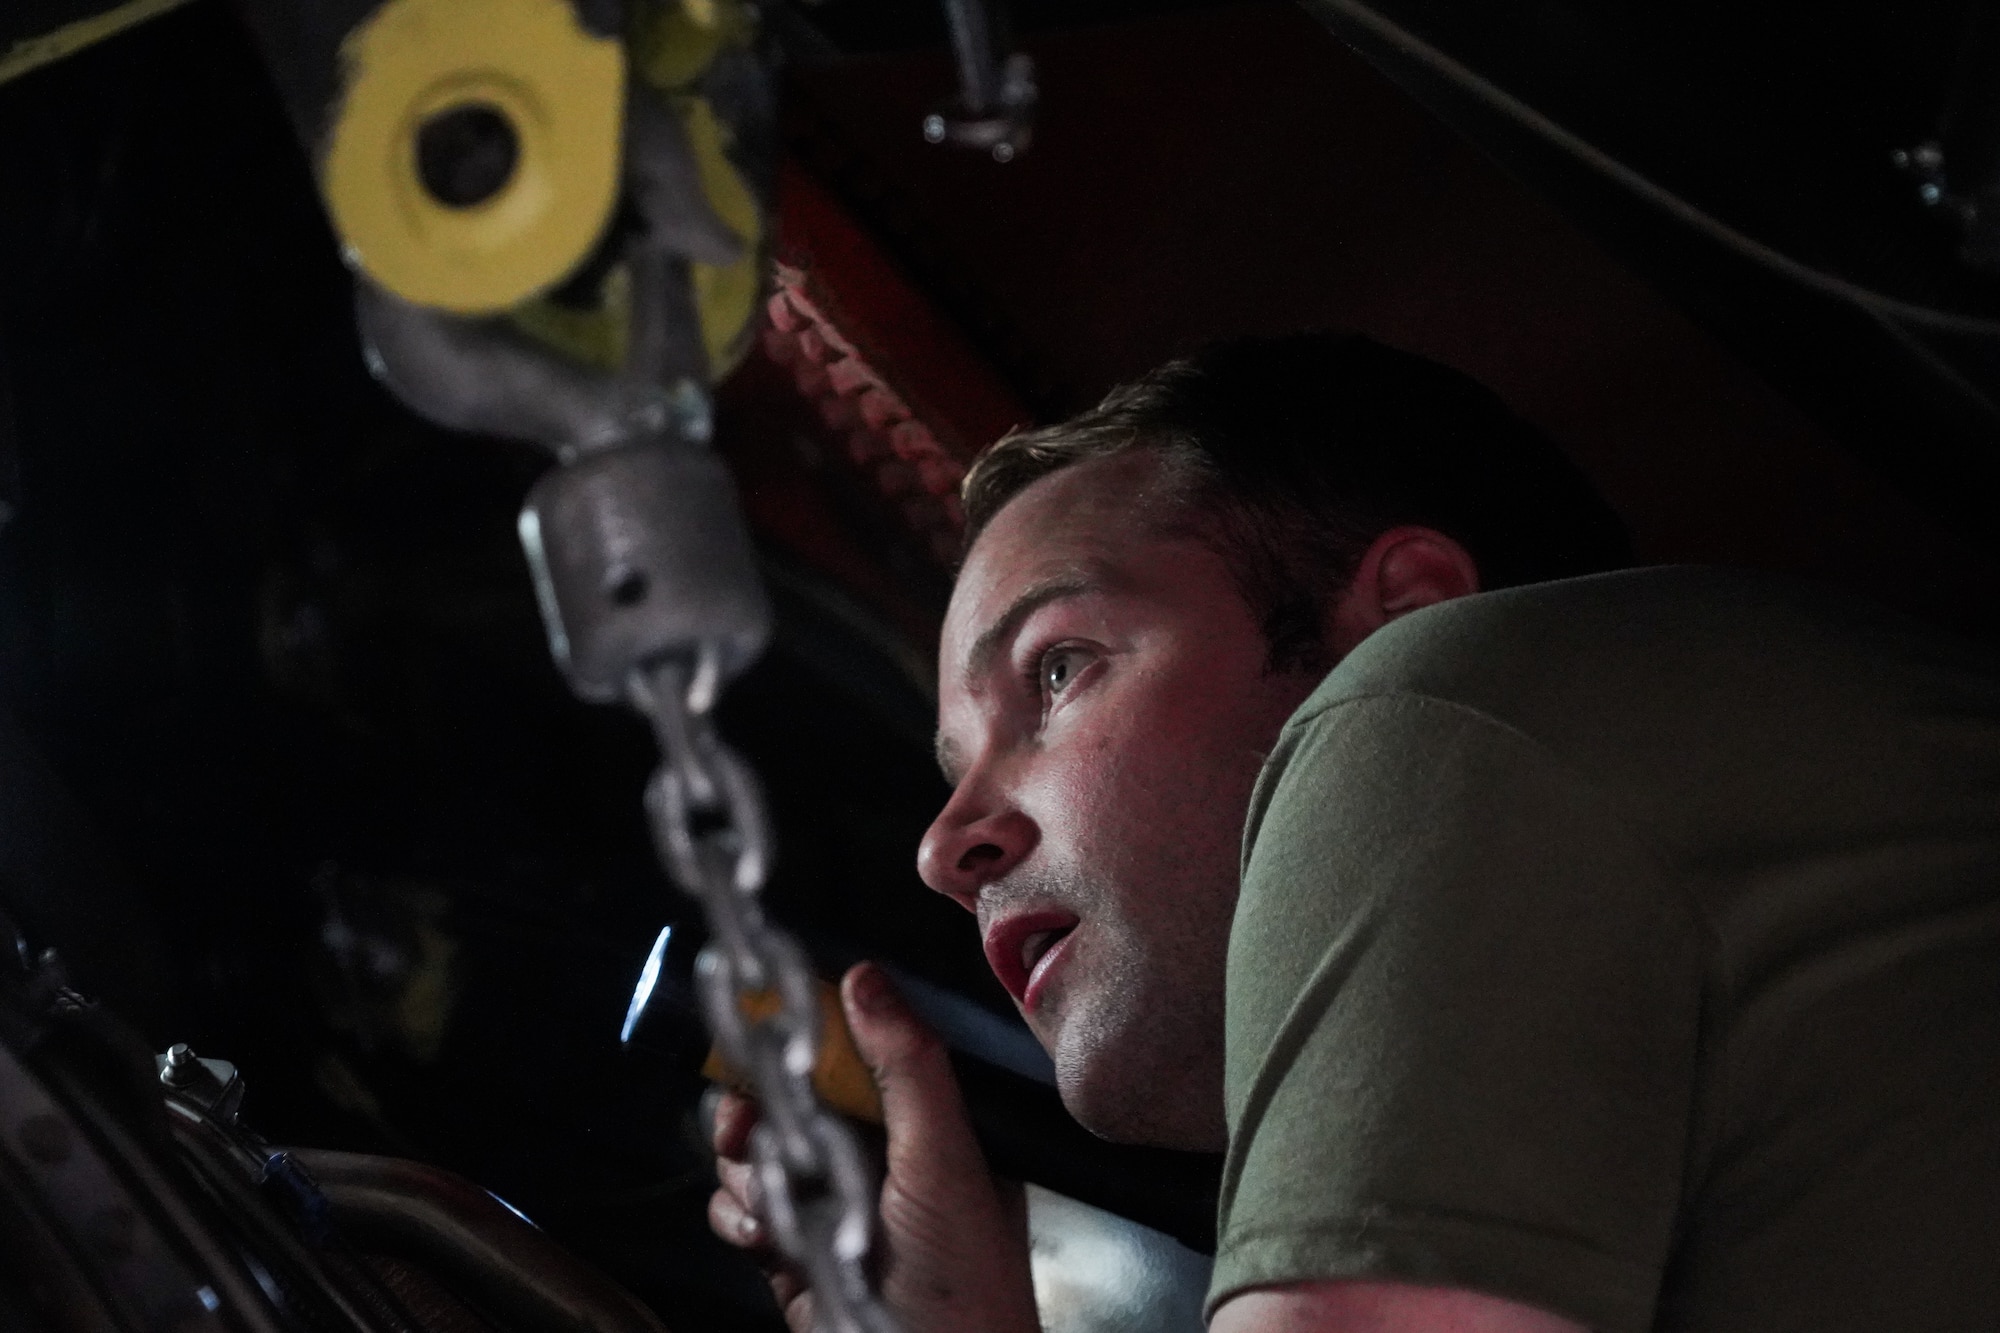 Tech. Sgt. Alexander Brown, an aerospace propulsion specialist assigned to the 914th Aircraft Maintenance Squadron at Niagara Falls Air Reserve Station, New York, inspects the alignment of a KC-135 Stratotanker engine mounting bracket during an engine lift on Oct. 18, 2022. (U.S. Air Force photo by 1st Lt. Lucas Morrow)